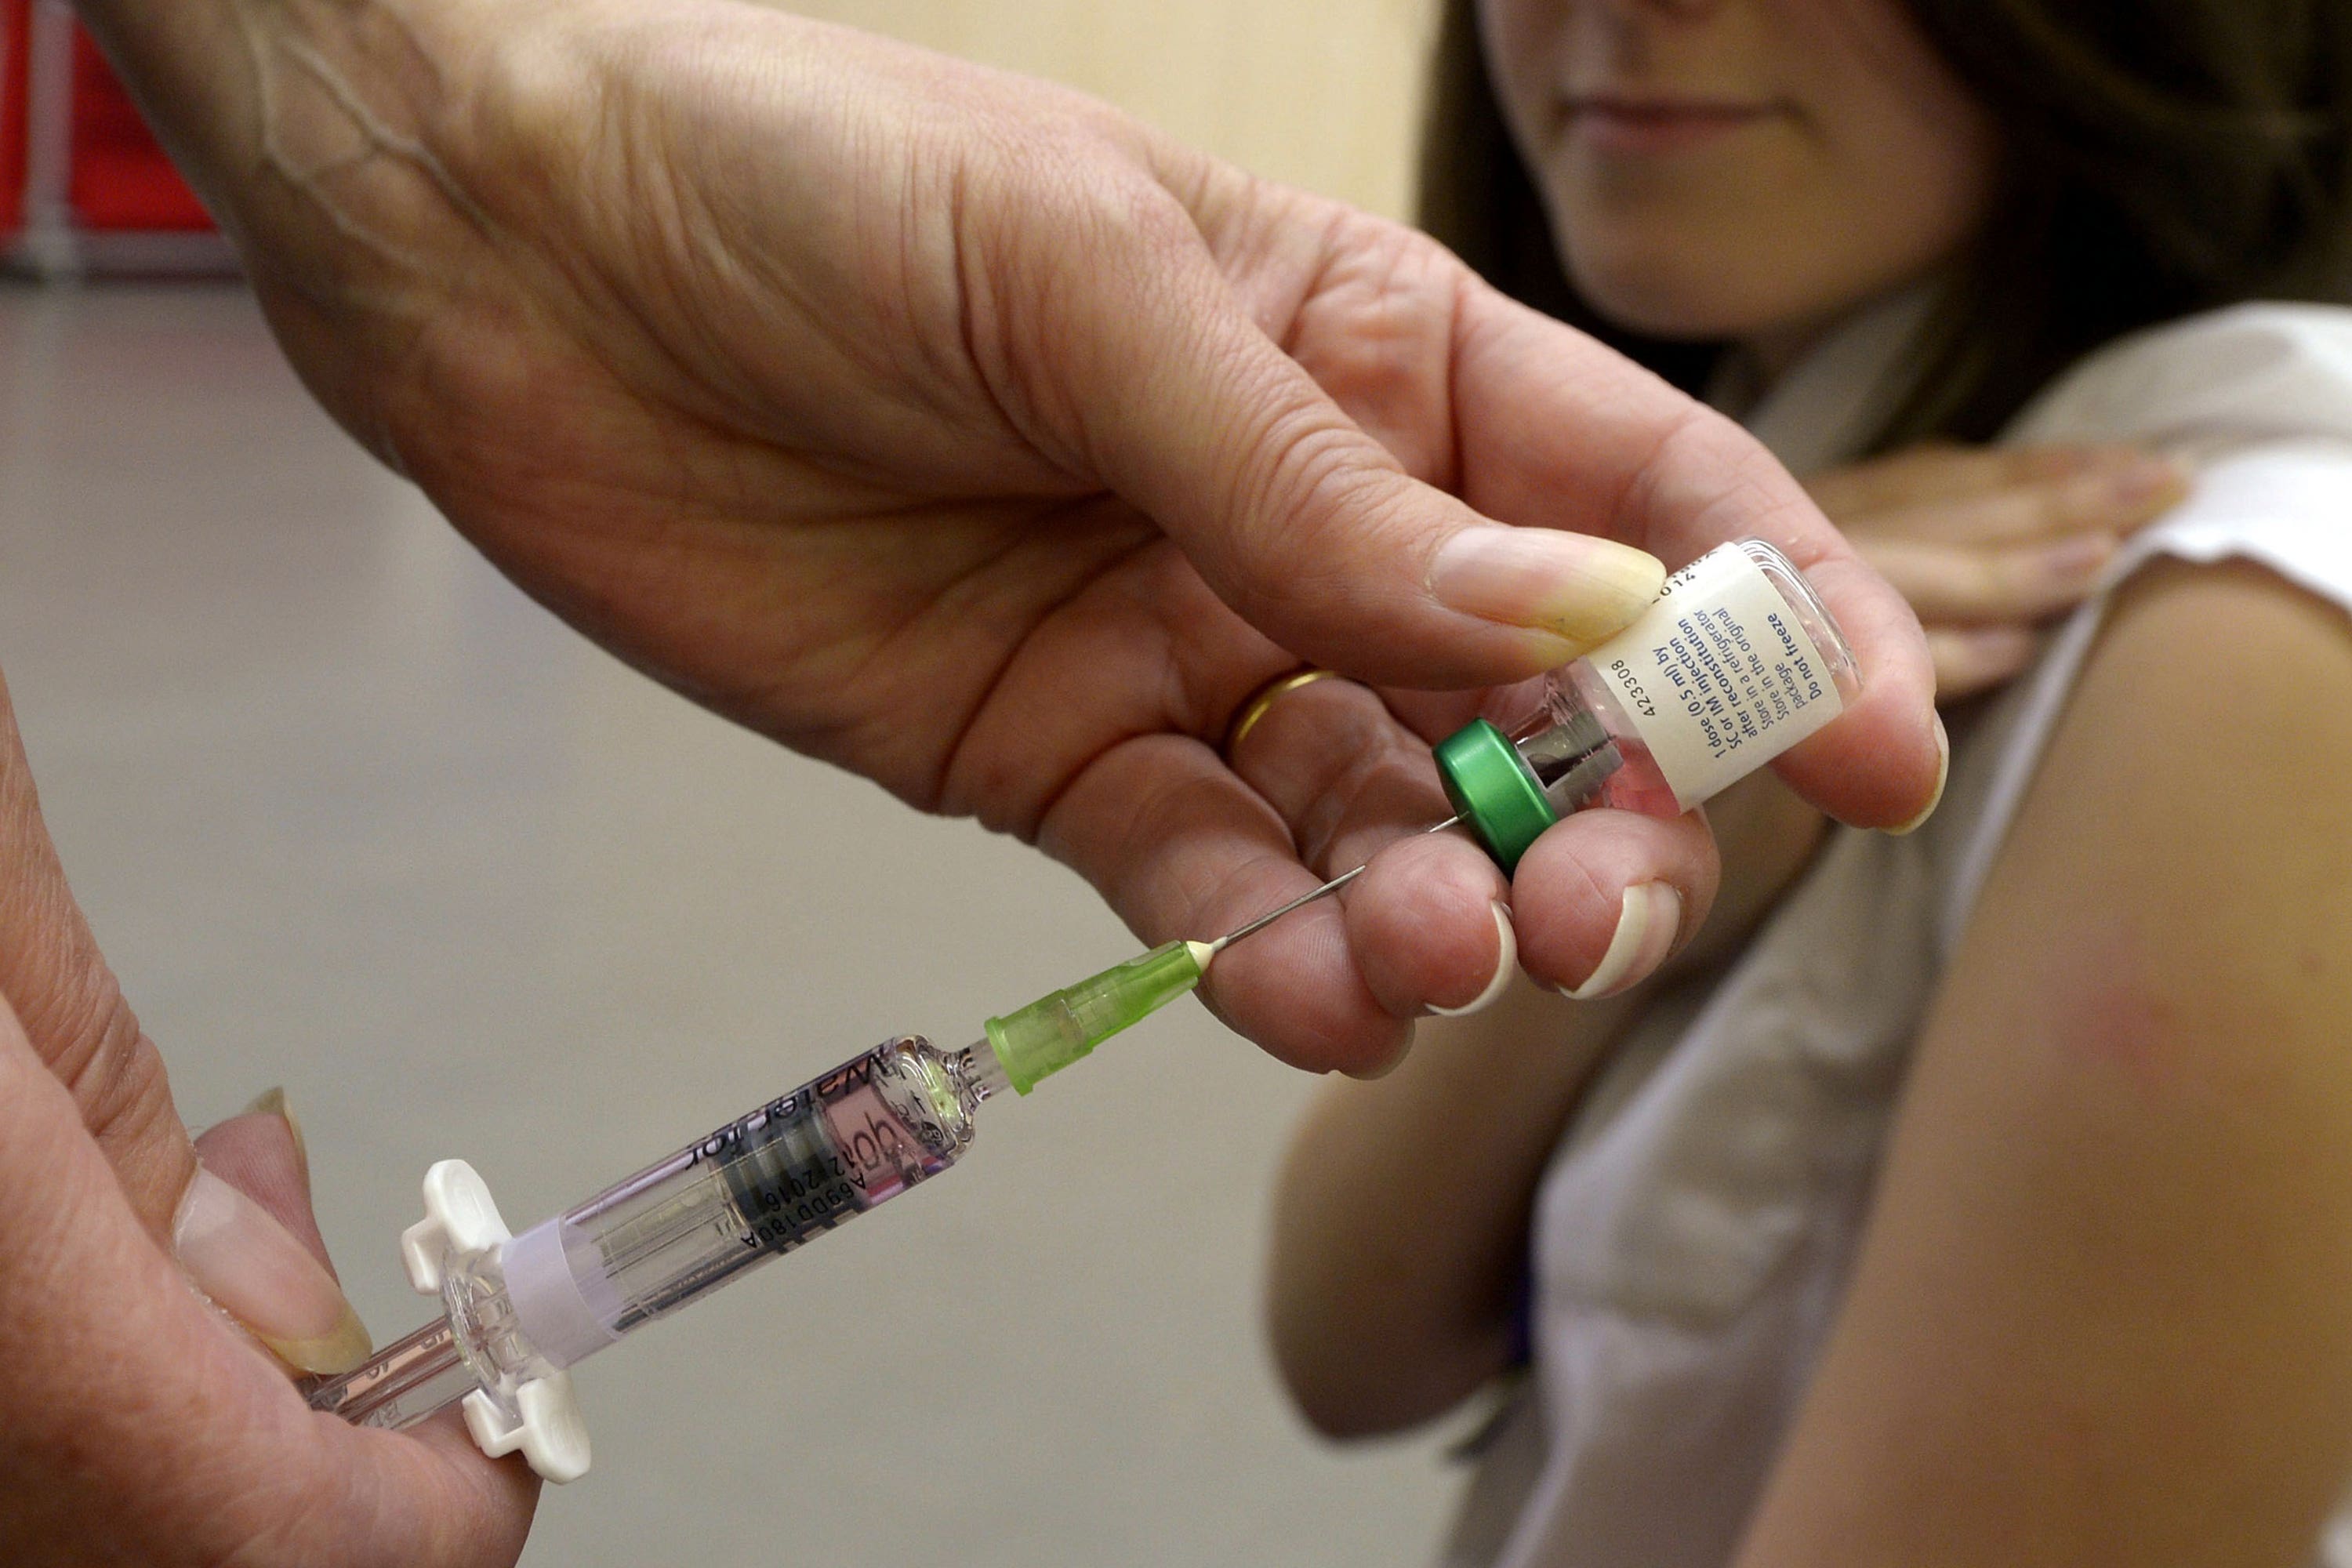 All regions of England have reported cases of measles in recent weeks